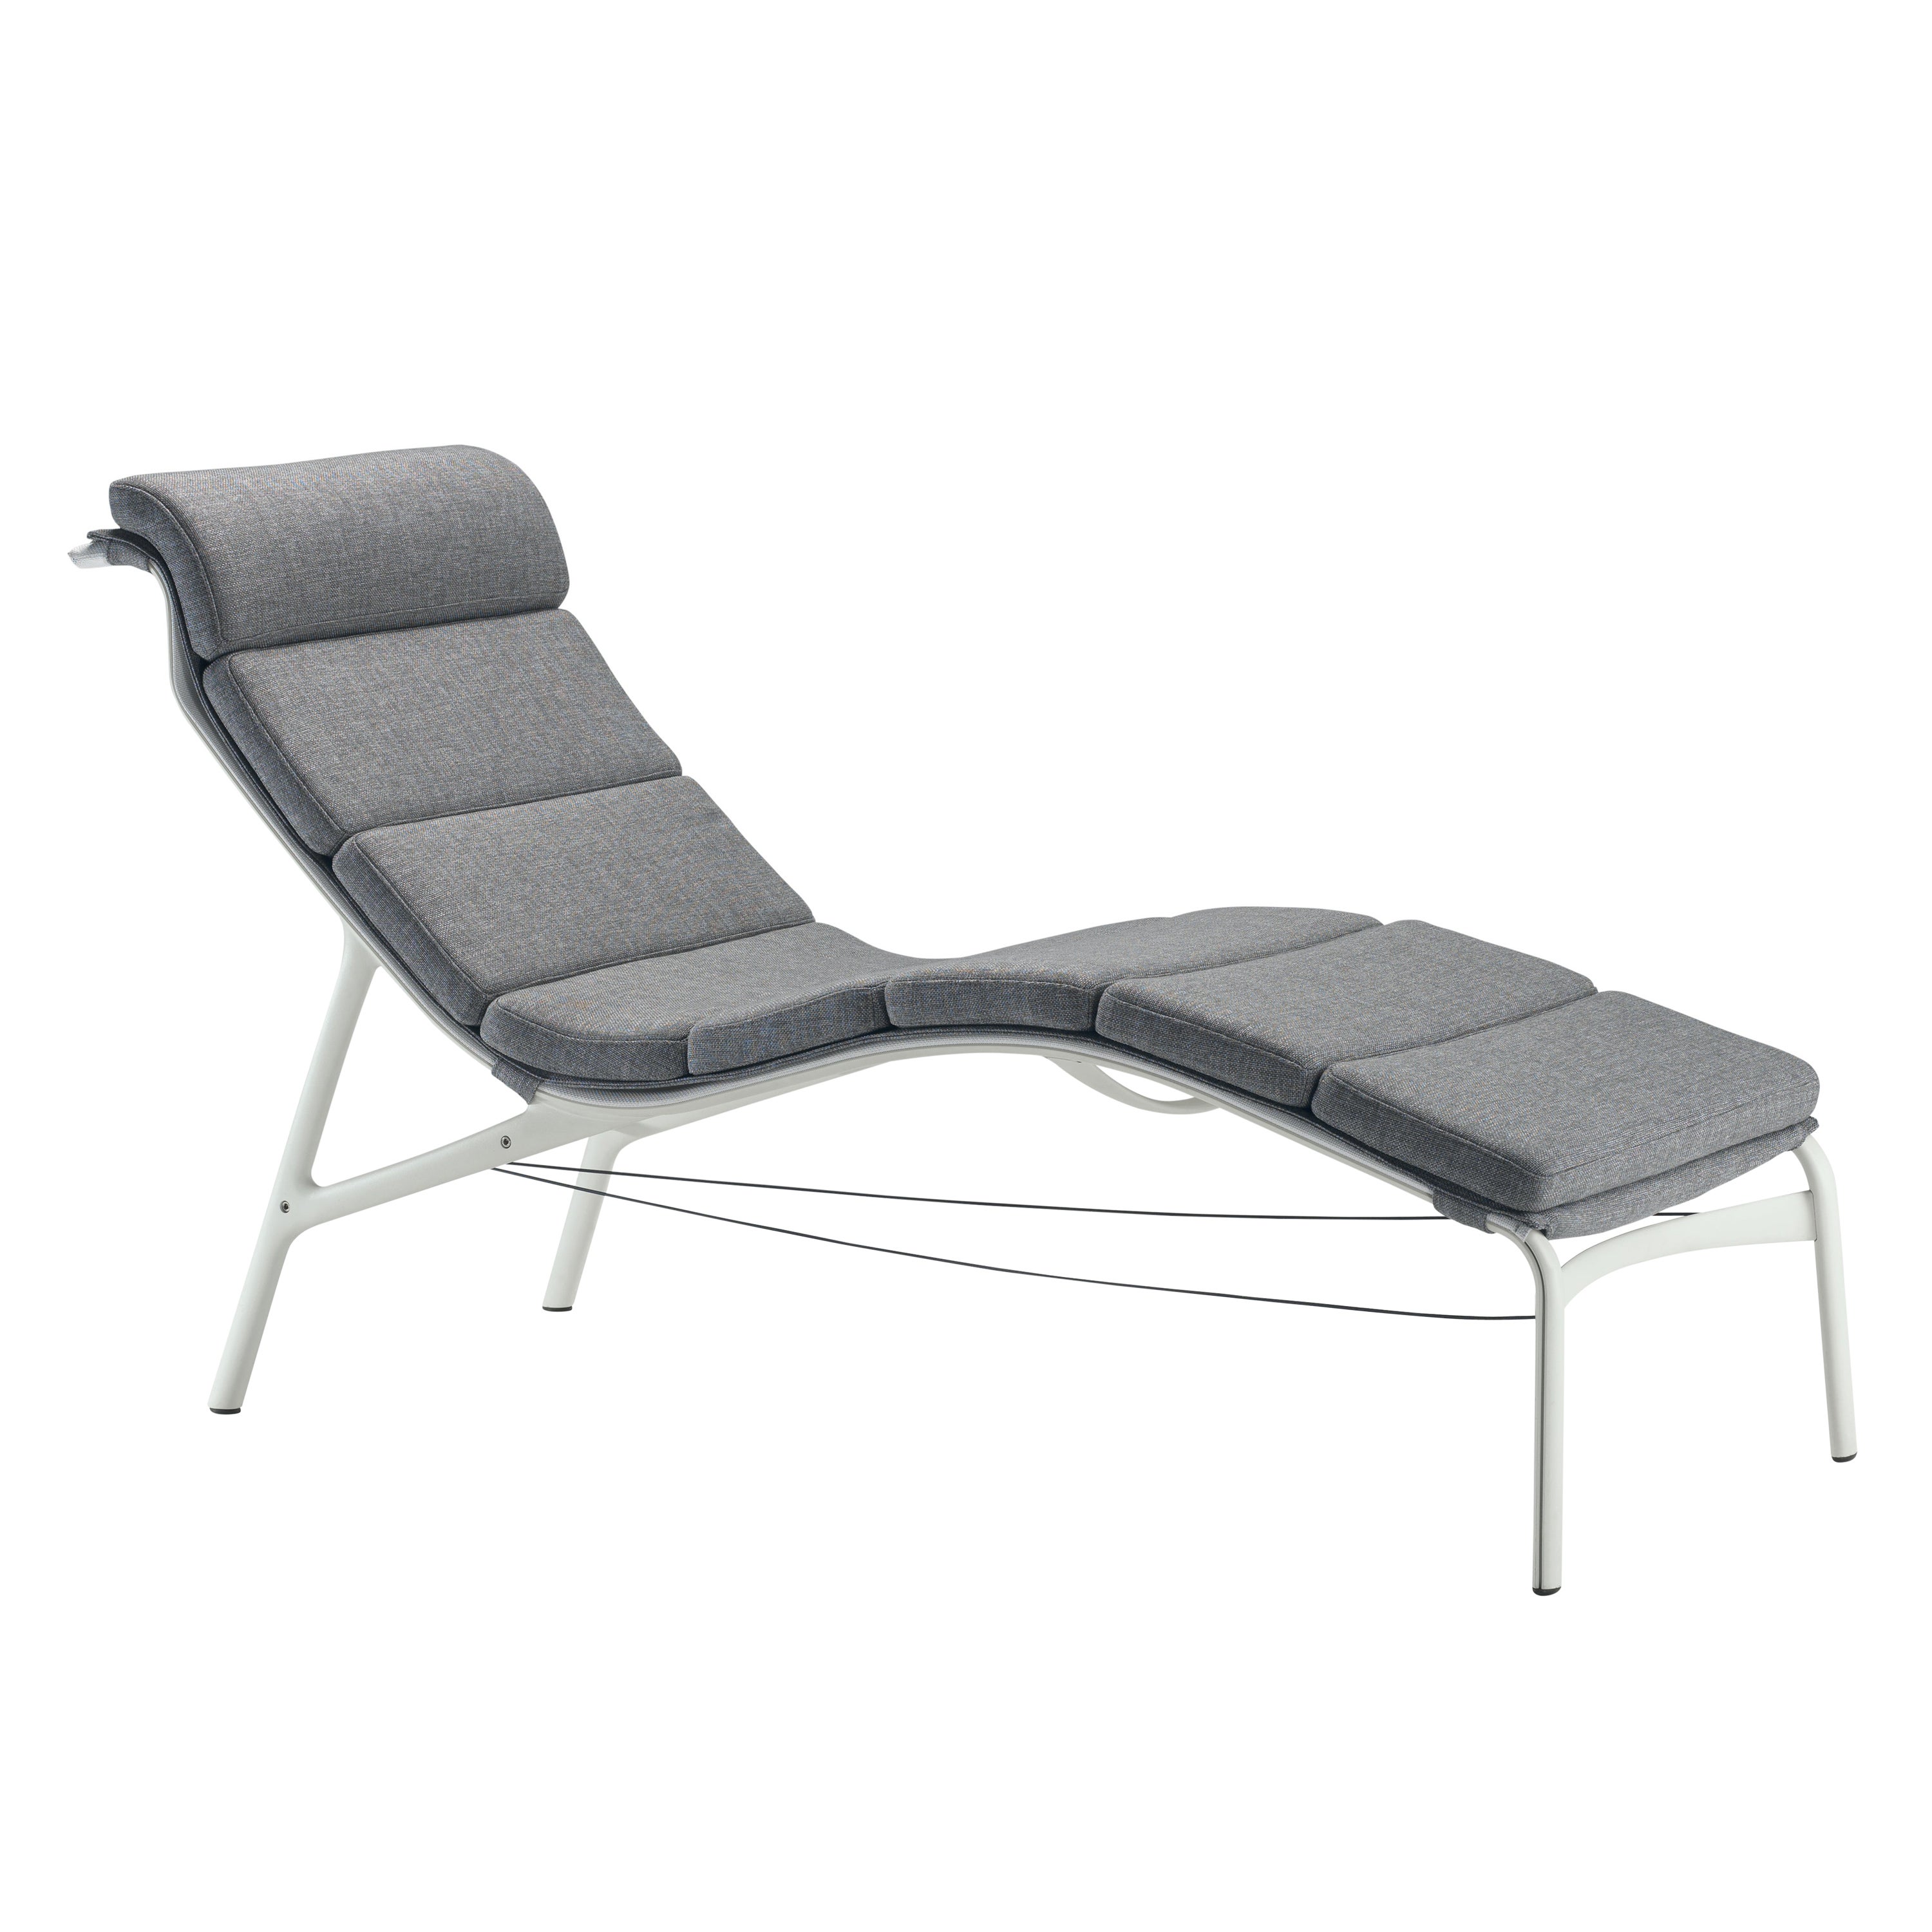 Alias 414 Longframe Soft Outdoor Chair in Grey & White Lacquered Aluminum Frame